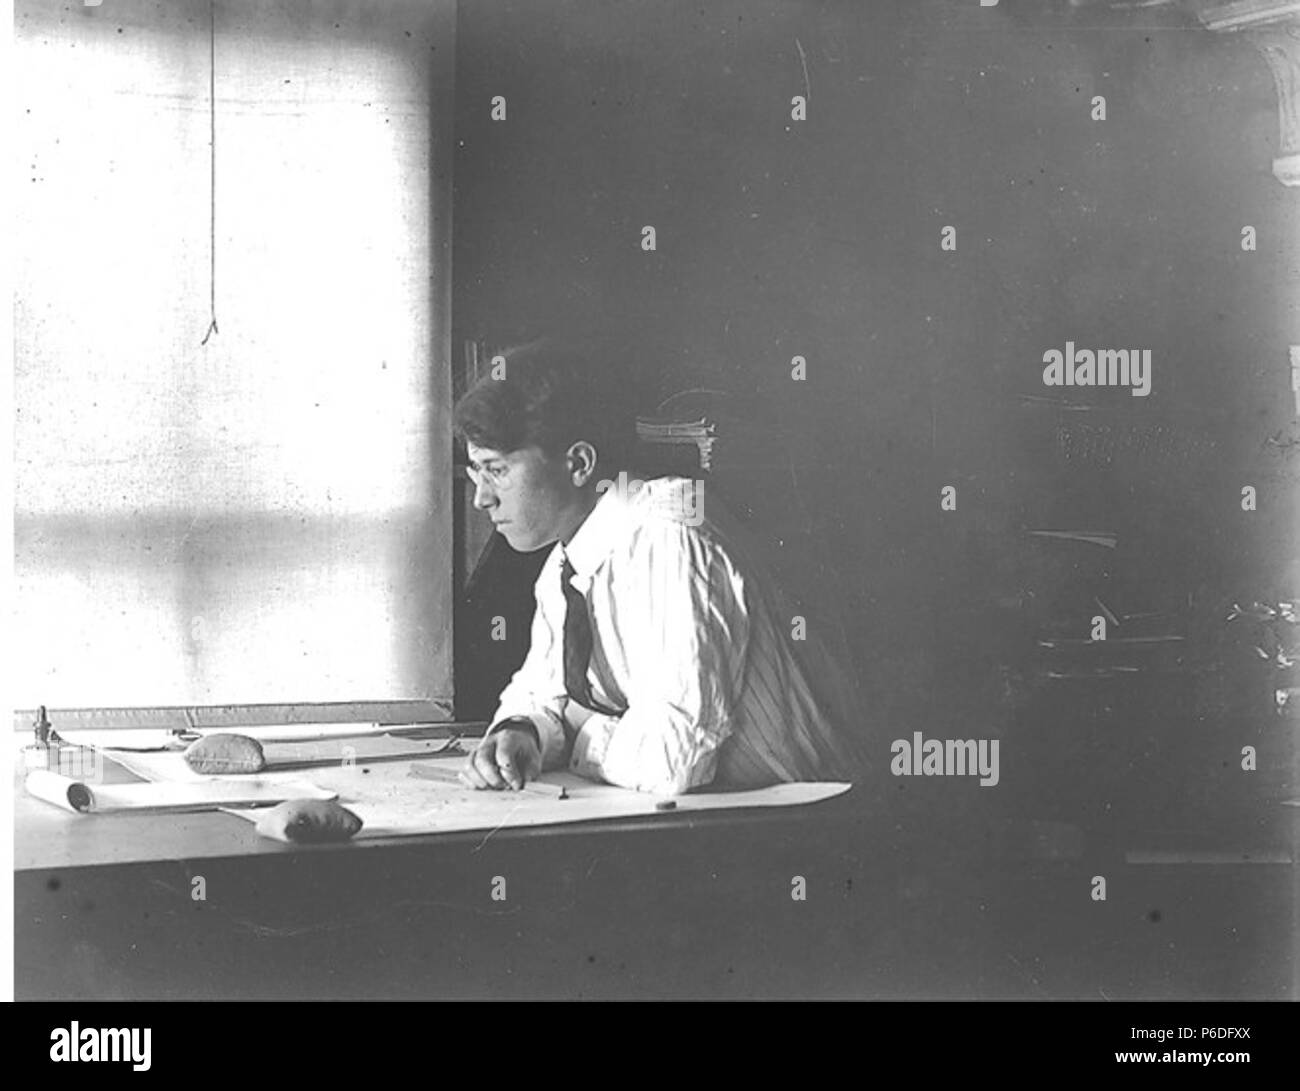 . English: G. Verne Bagley in engineer's office, Fort Lawton, Washington, 1905 . English: On verso of image: Verne Text from Kiehl log: G.V. Bagley office at Ft. Lawton. 1905. Album 1.060 Subjects (LCTGM): United States. Army--People--Washington (State)--Seattle Subjects (LCSH): Bagley, G. Verne; Military engineers--Washington (State)--Fort Lawton (Seattle)  . 1905 49 G Verne Bagley in engineer's office, Fort Lawton, Washington, 1905 (KIEHL 222) Stock Photo